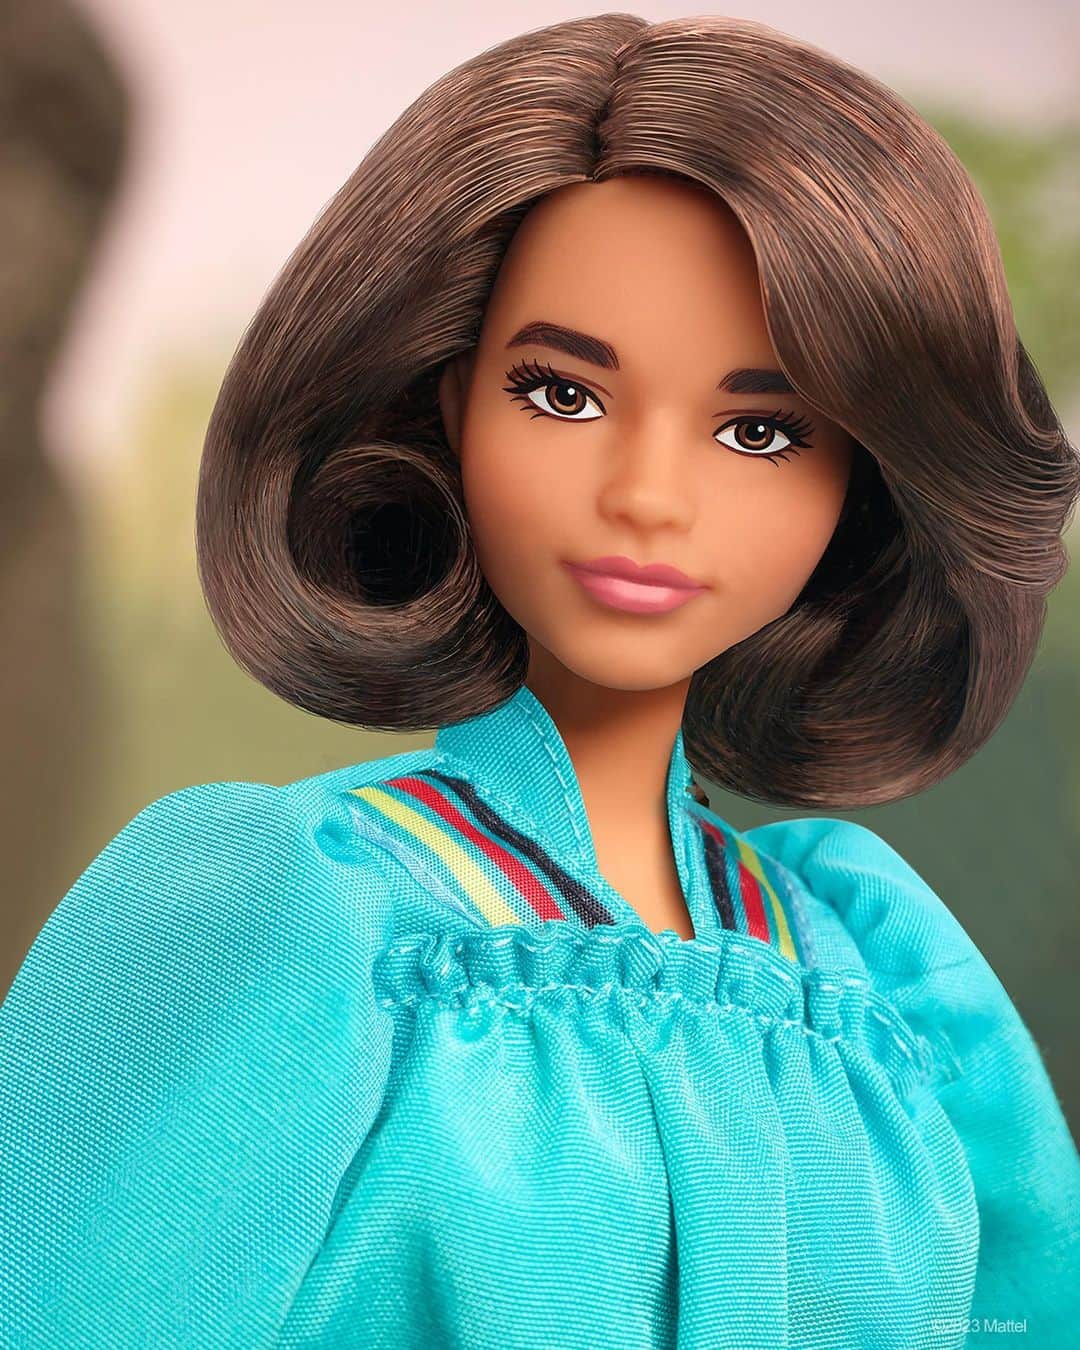 Mattelのインスタグラム：「Chief, change-maker, and proud Cherokee leader. Principal Chief Wilma Mankiller is the newest #Barbie Inspiring Women doll.   Wilma was the first woman to serve as Principal Chief of the Cherokee Nation and a fierce advocate for Native American, women’s, and children’s rights. In 1998, she was awarded the Presidential Medal of Freedom.   In honor of Wilma’s powerful legacy, @Barbie will donate to the American Indian Resource Center, supporting initiatives to empower indigenous women and girls, and preserving culture and traditions within Native American communities. #NativeAmericanHeritageMonth #YouCanBeAnything @MattelCreations」